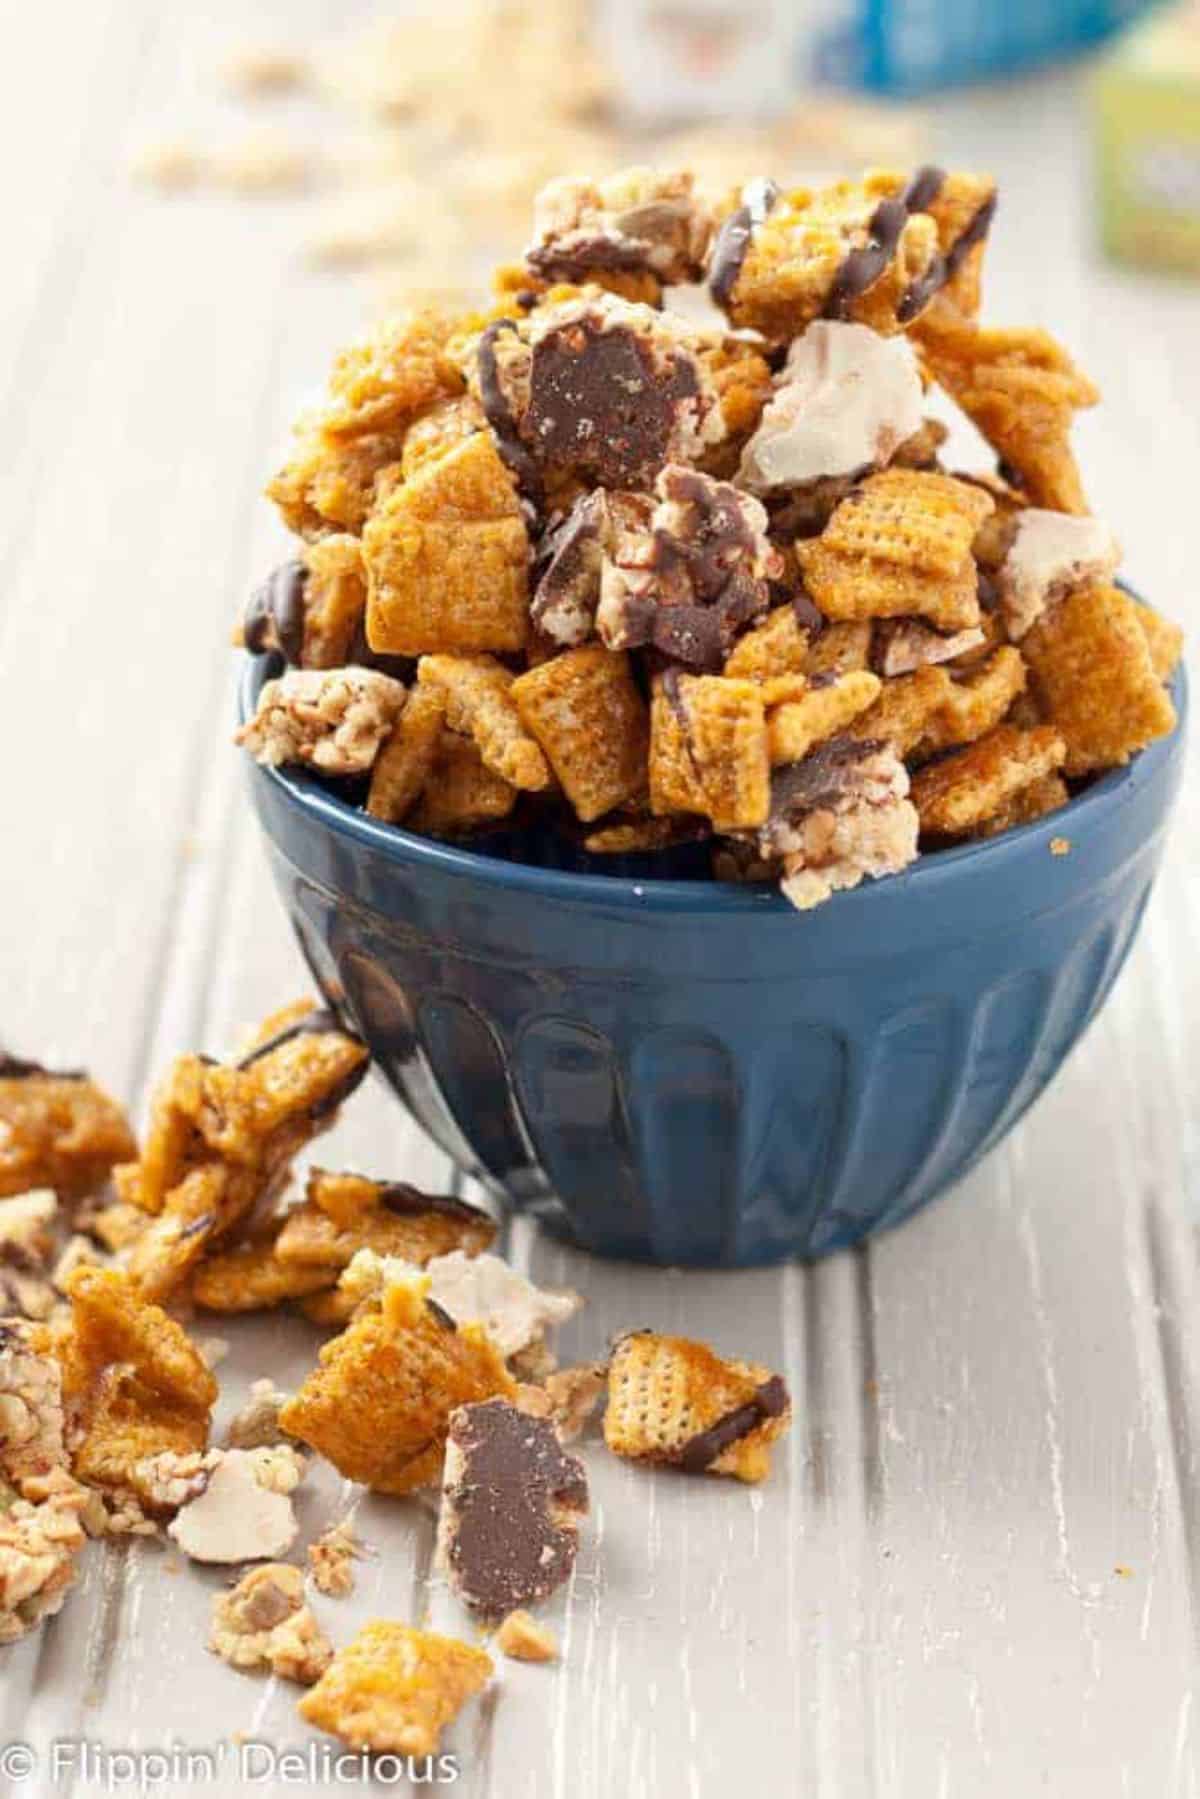 Crunchy Caramel and Salted Chocolate Chex Mix in a blue bowl.